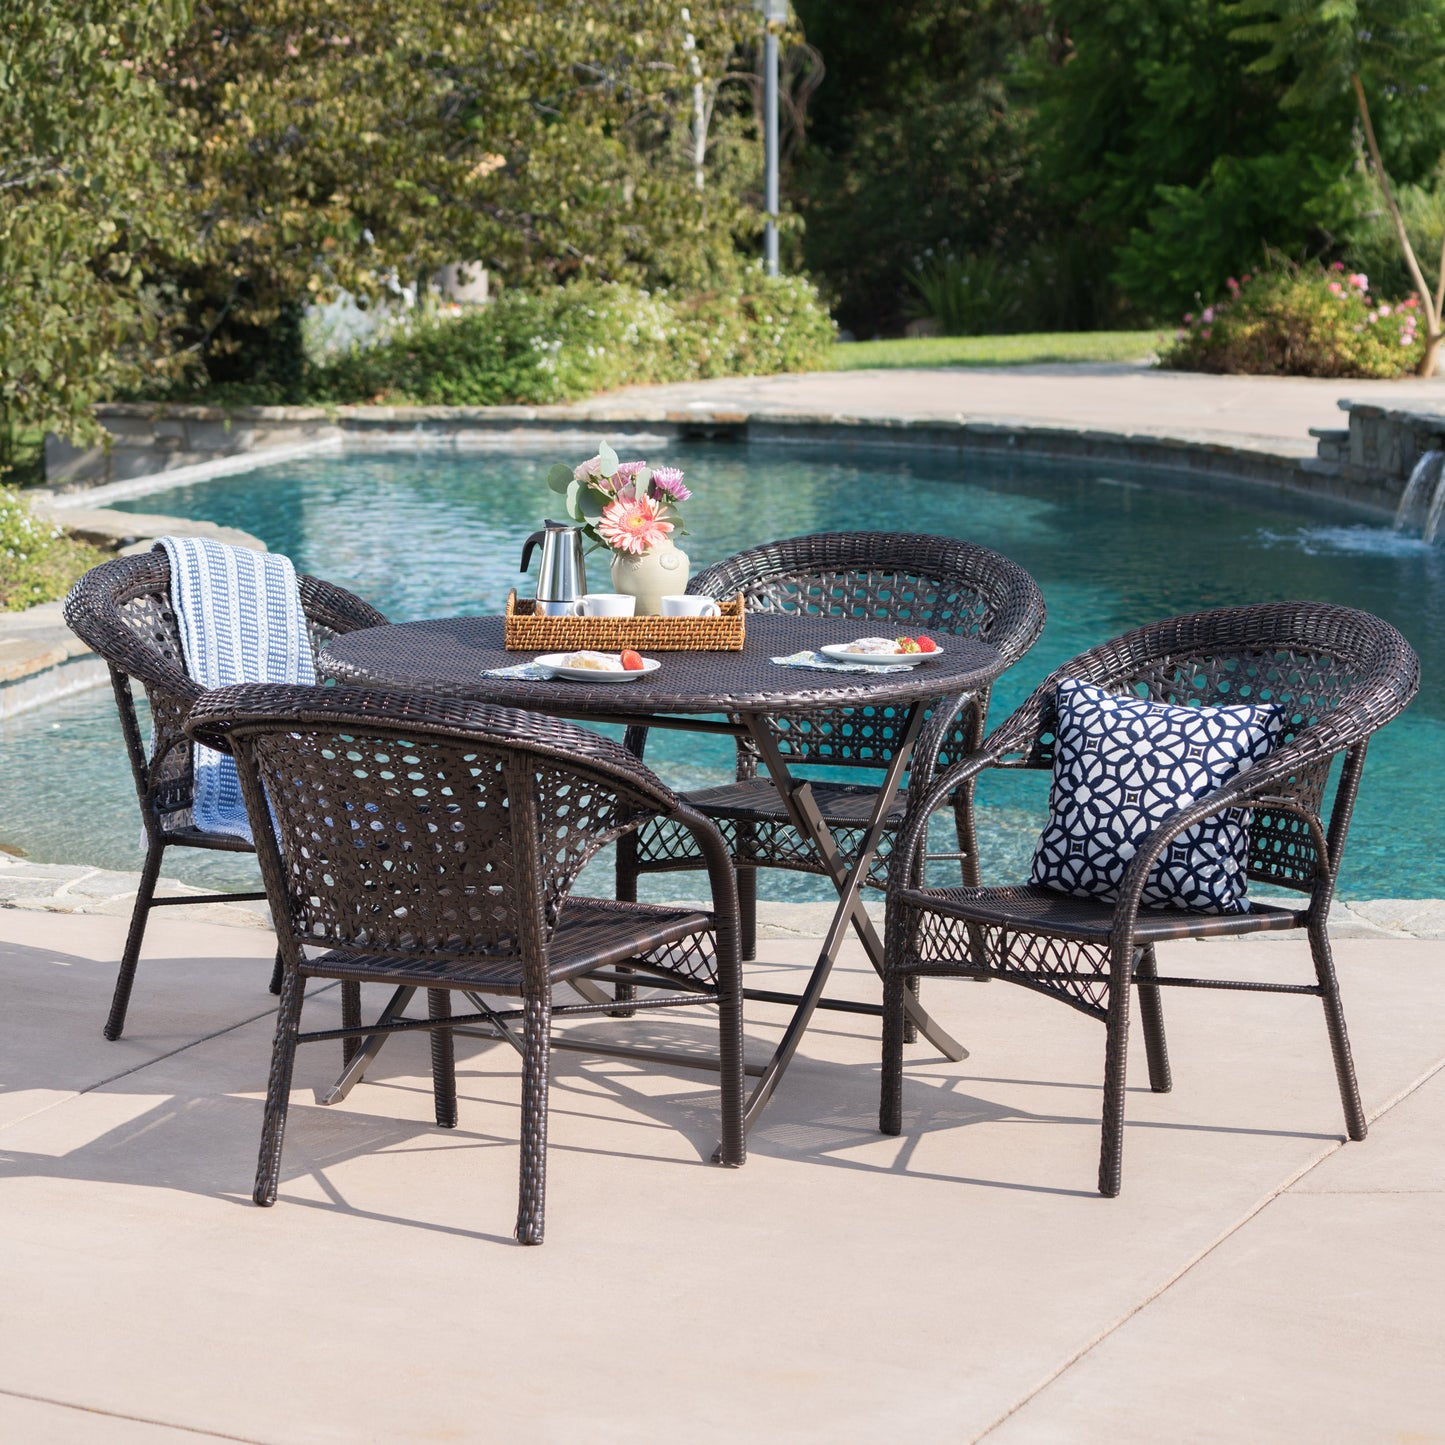 Mackenzie Outdoor 5 Piece Wicker Dining Set with Foldable Table and Chair